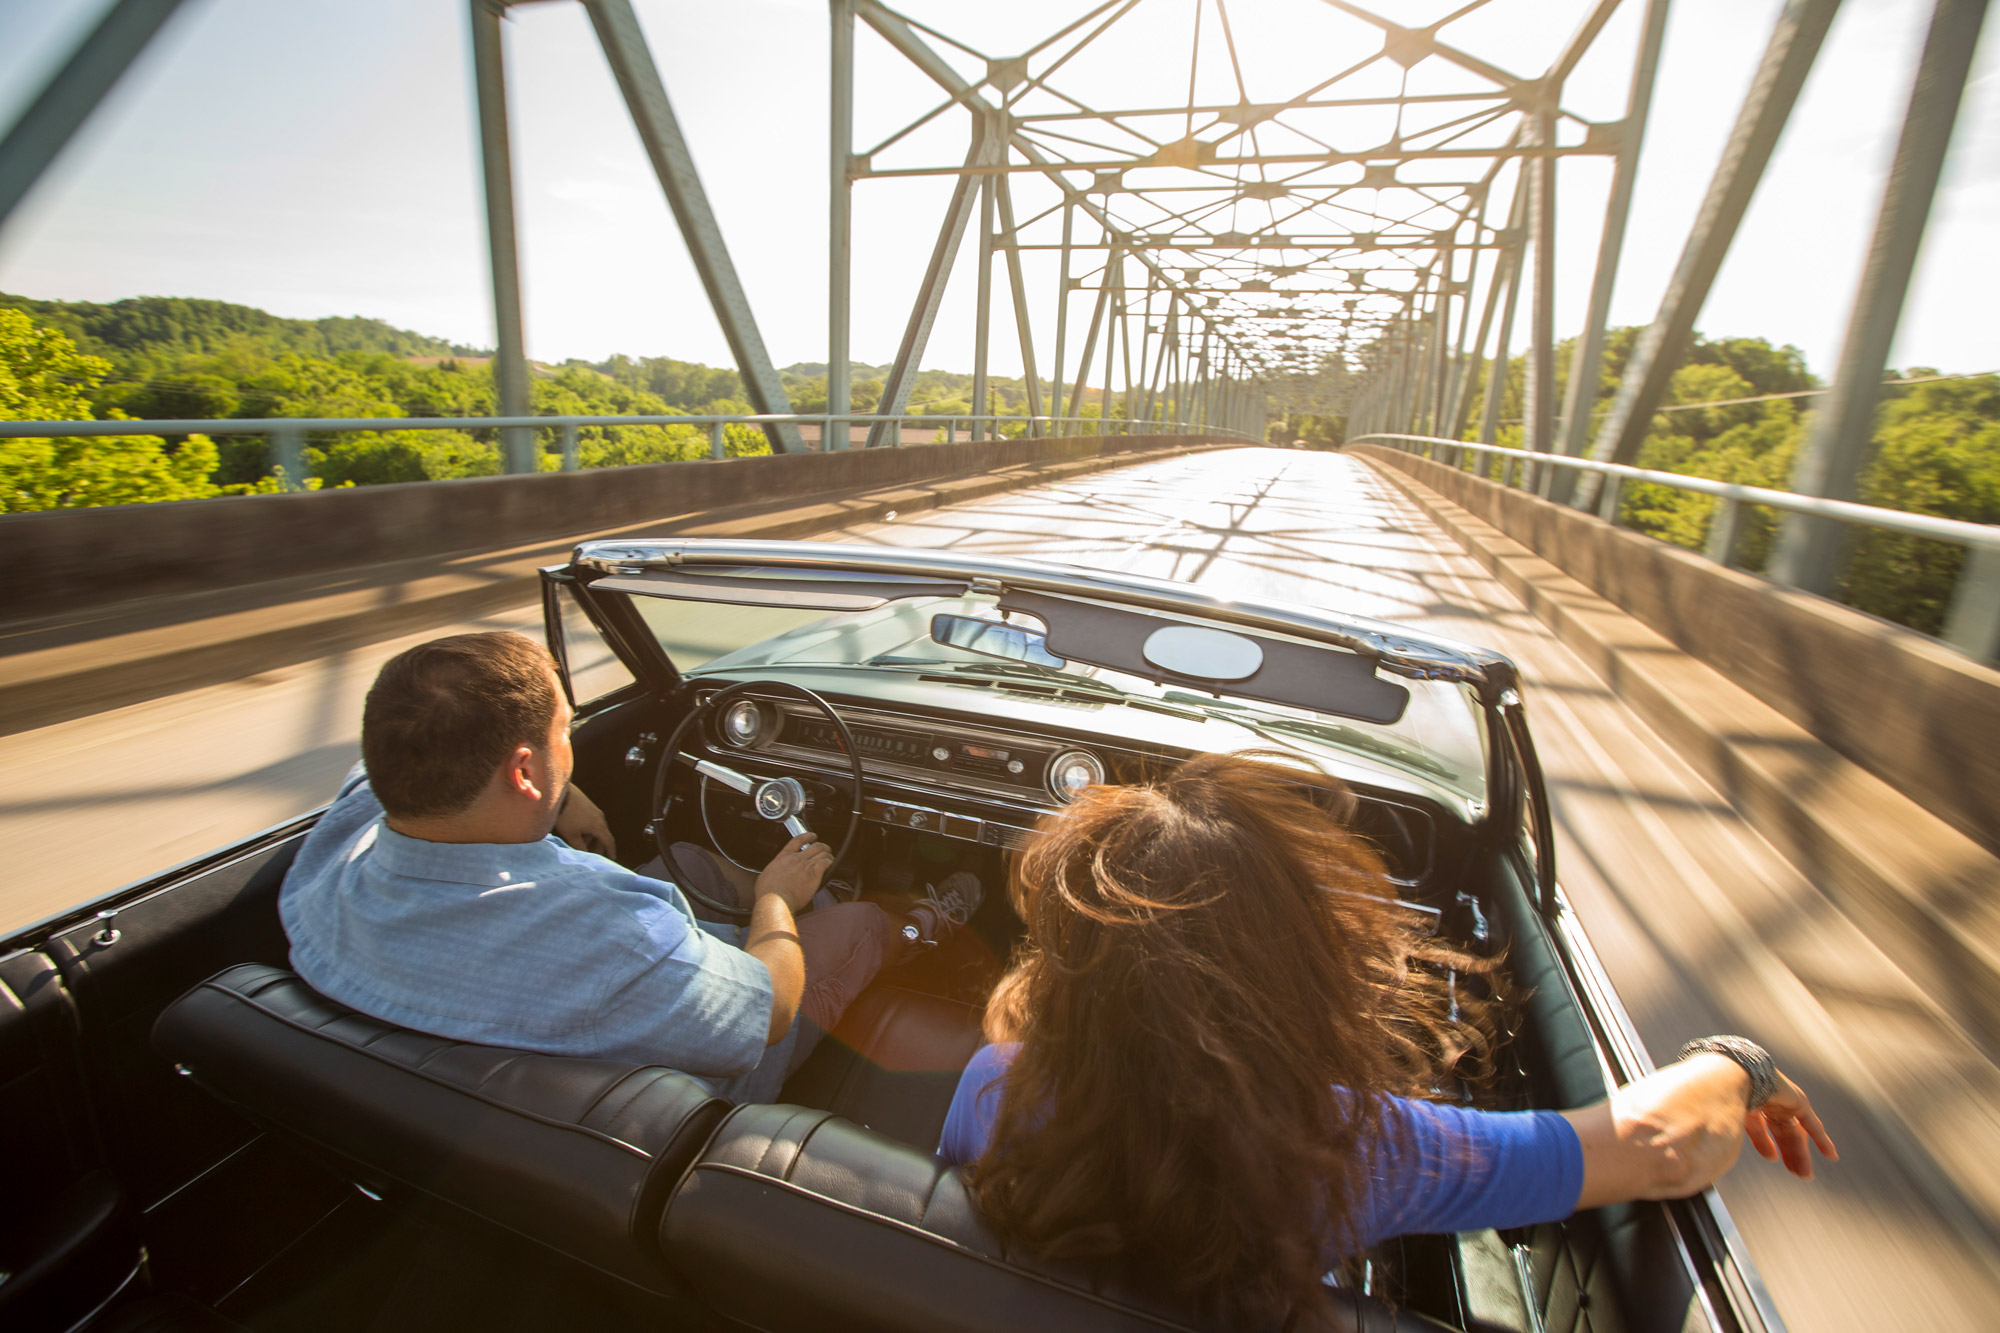 A man and woman cross a river bridge in an open-top convertible on a sunny day